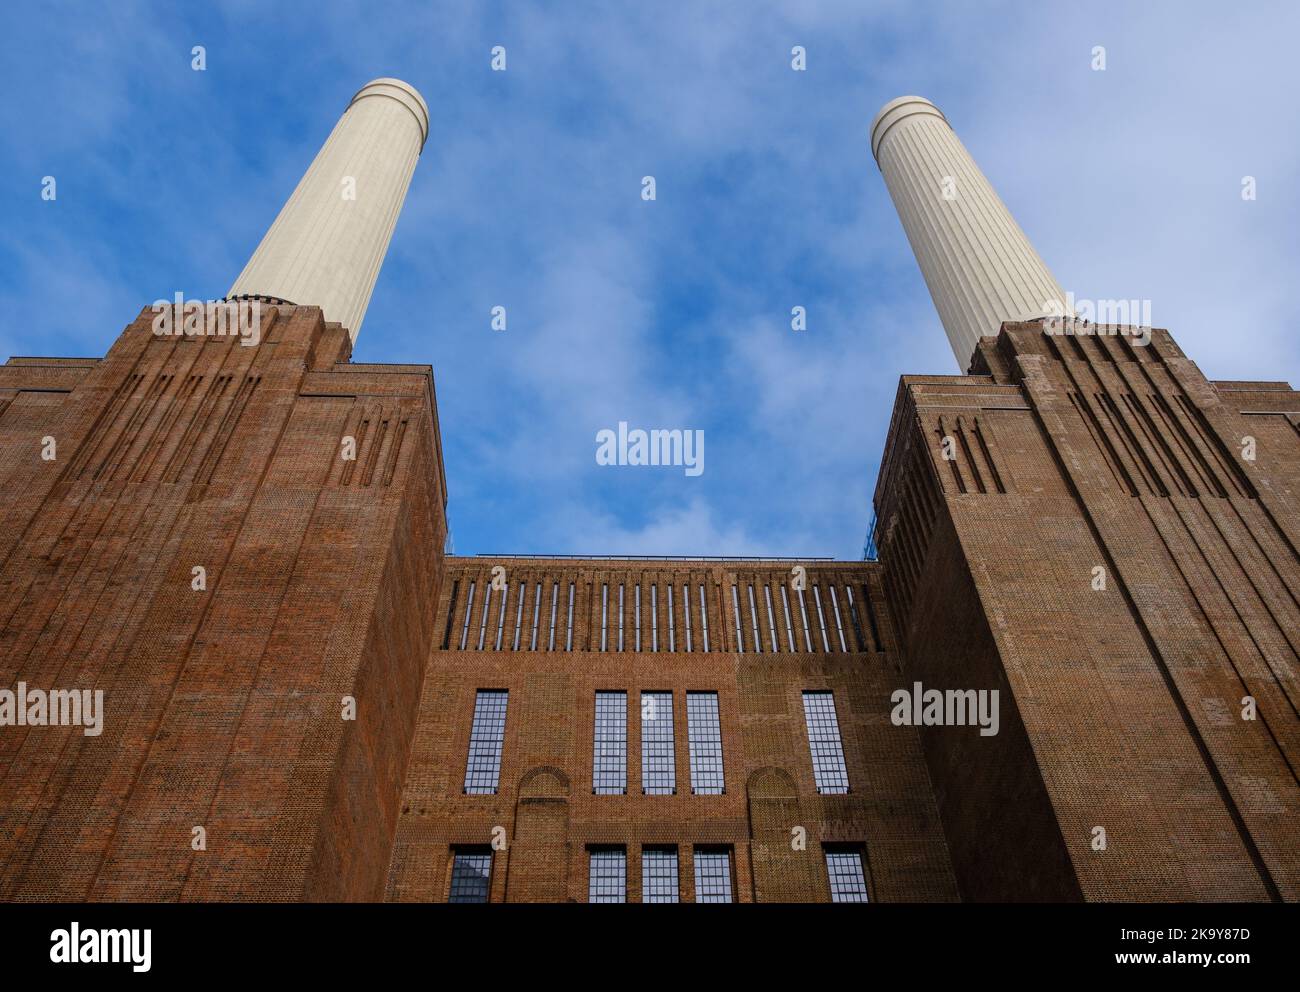 Two reconstructed chimneys of iconic Grade II* listed Battersea Power Station against a blue sky. Stock Photo